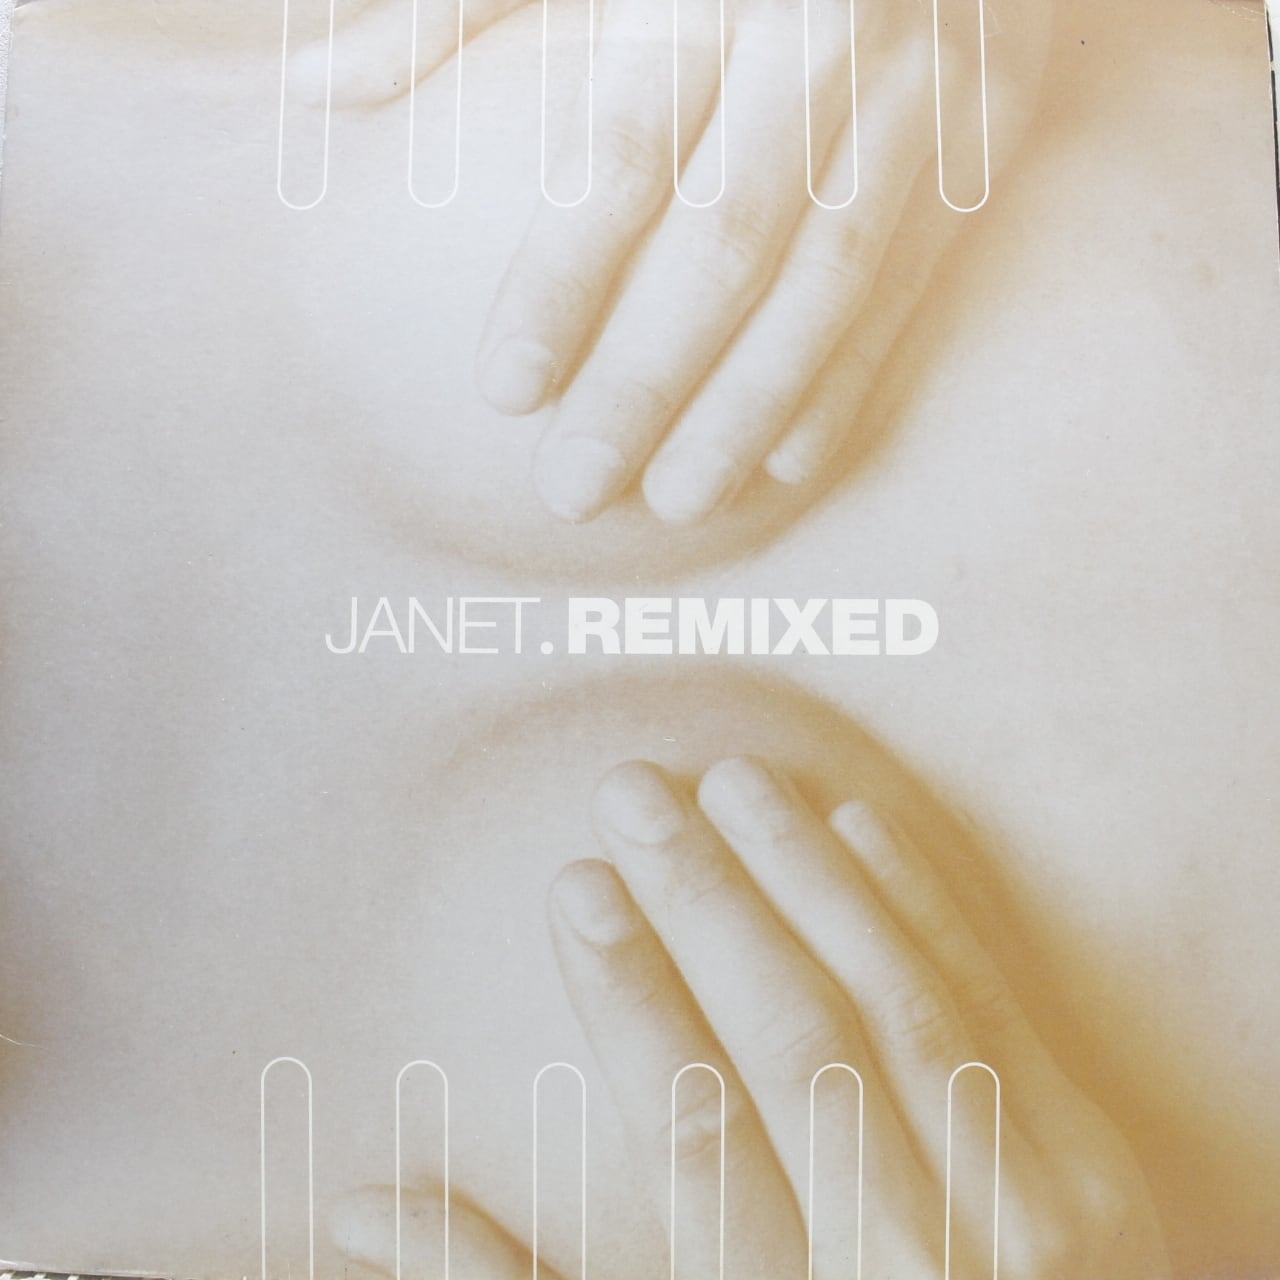 Janet Jackson / Janet.Remixed [7243 8 40305 1 3, VY2720] - 画像1